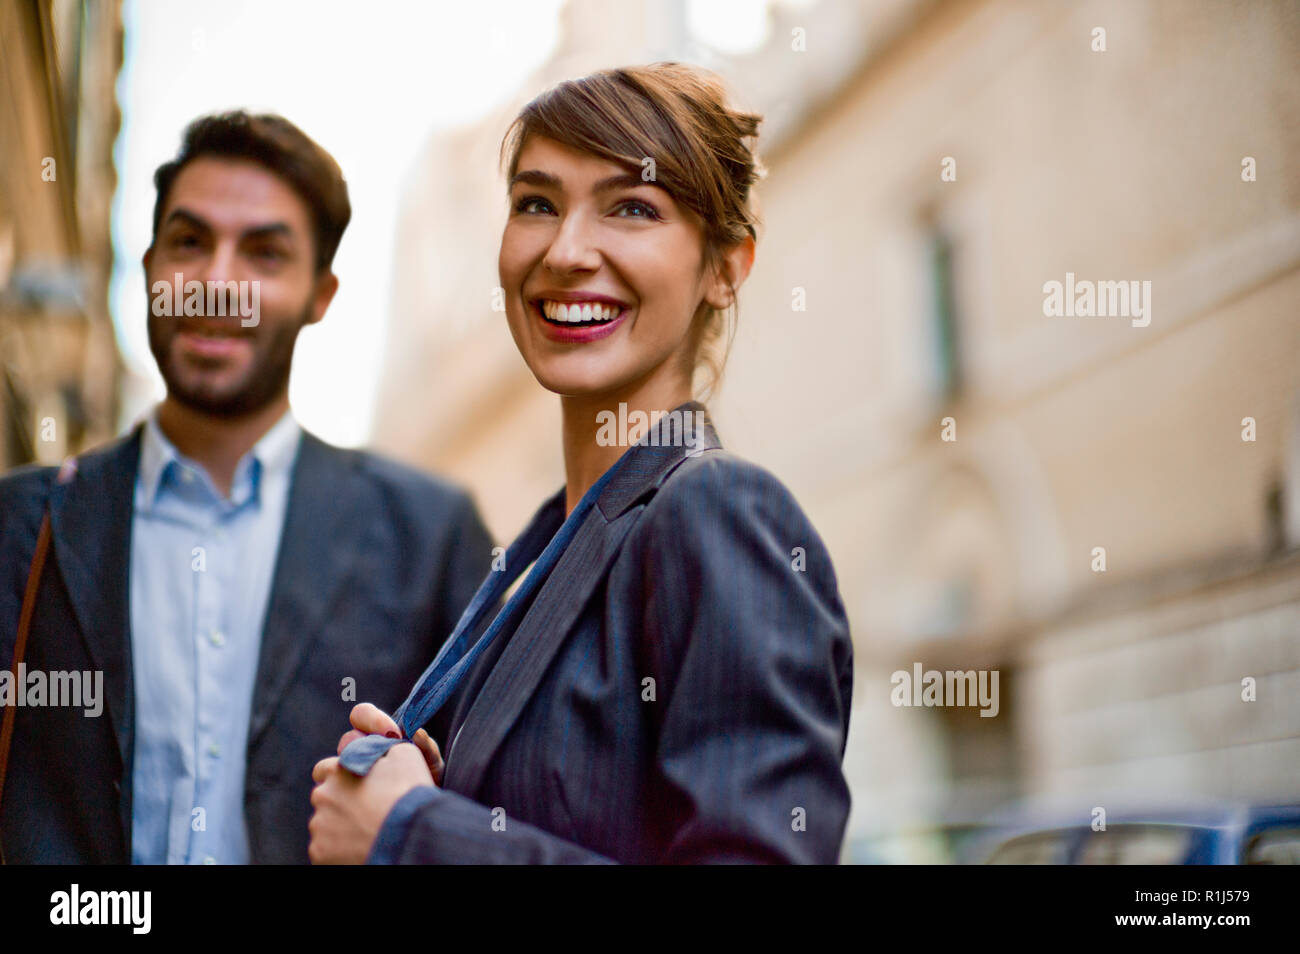 Two young colleagues head out on a date in the city at lunchtime. Stock Photo